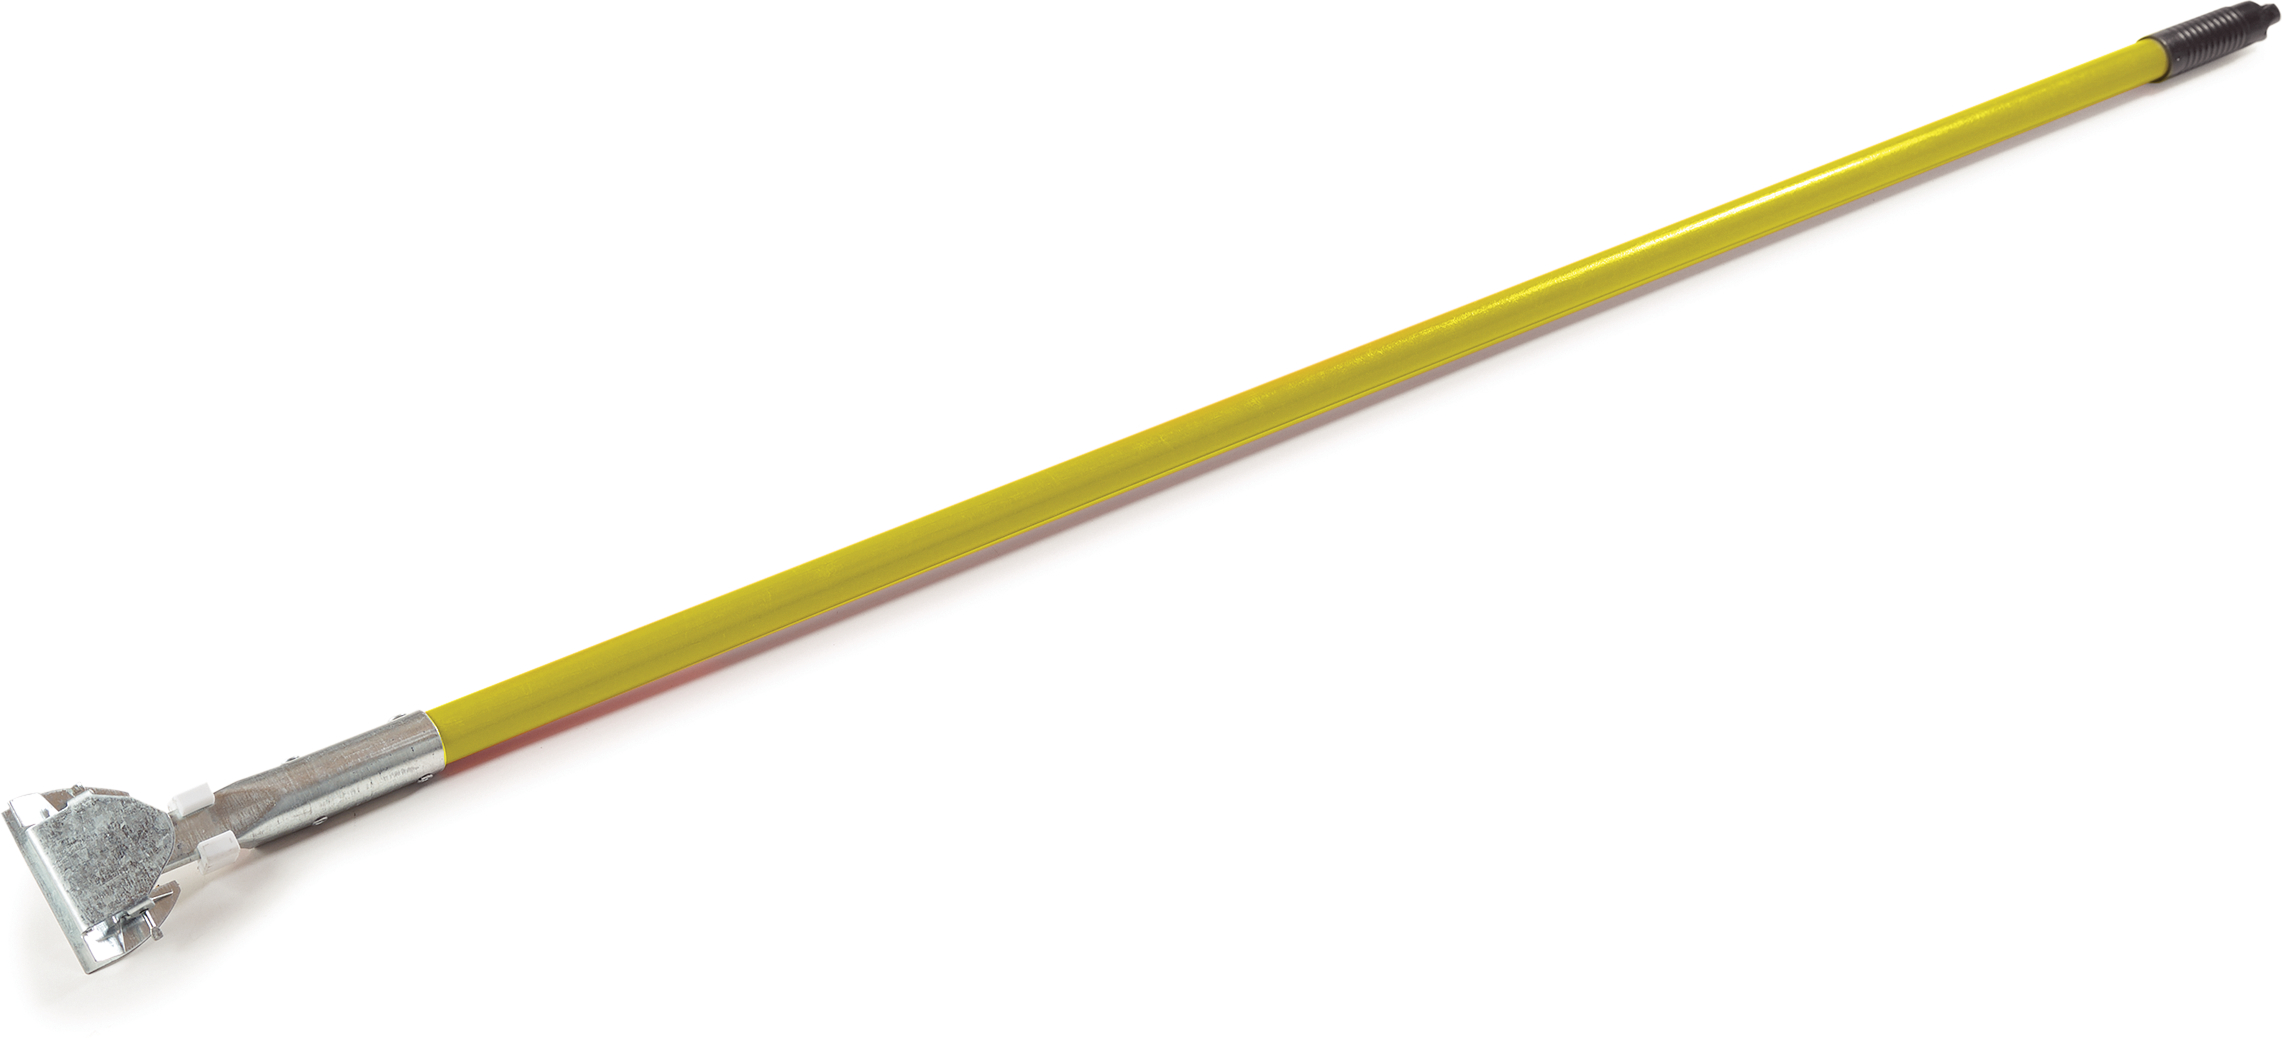 Fiberglass Dust Mop Handle with Clip-On Connector 60 - Yellow